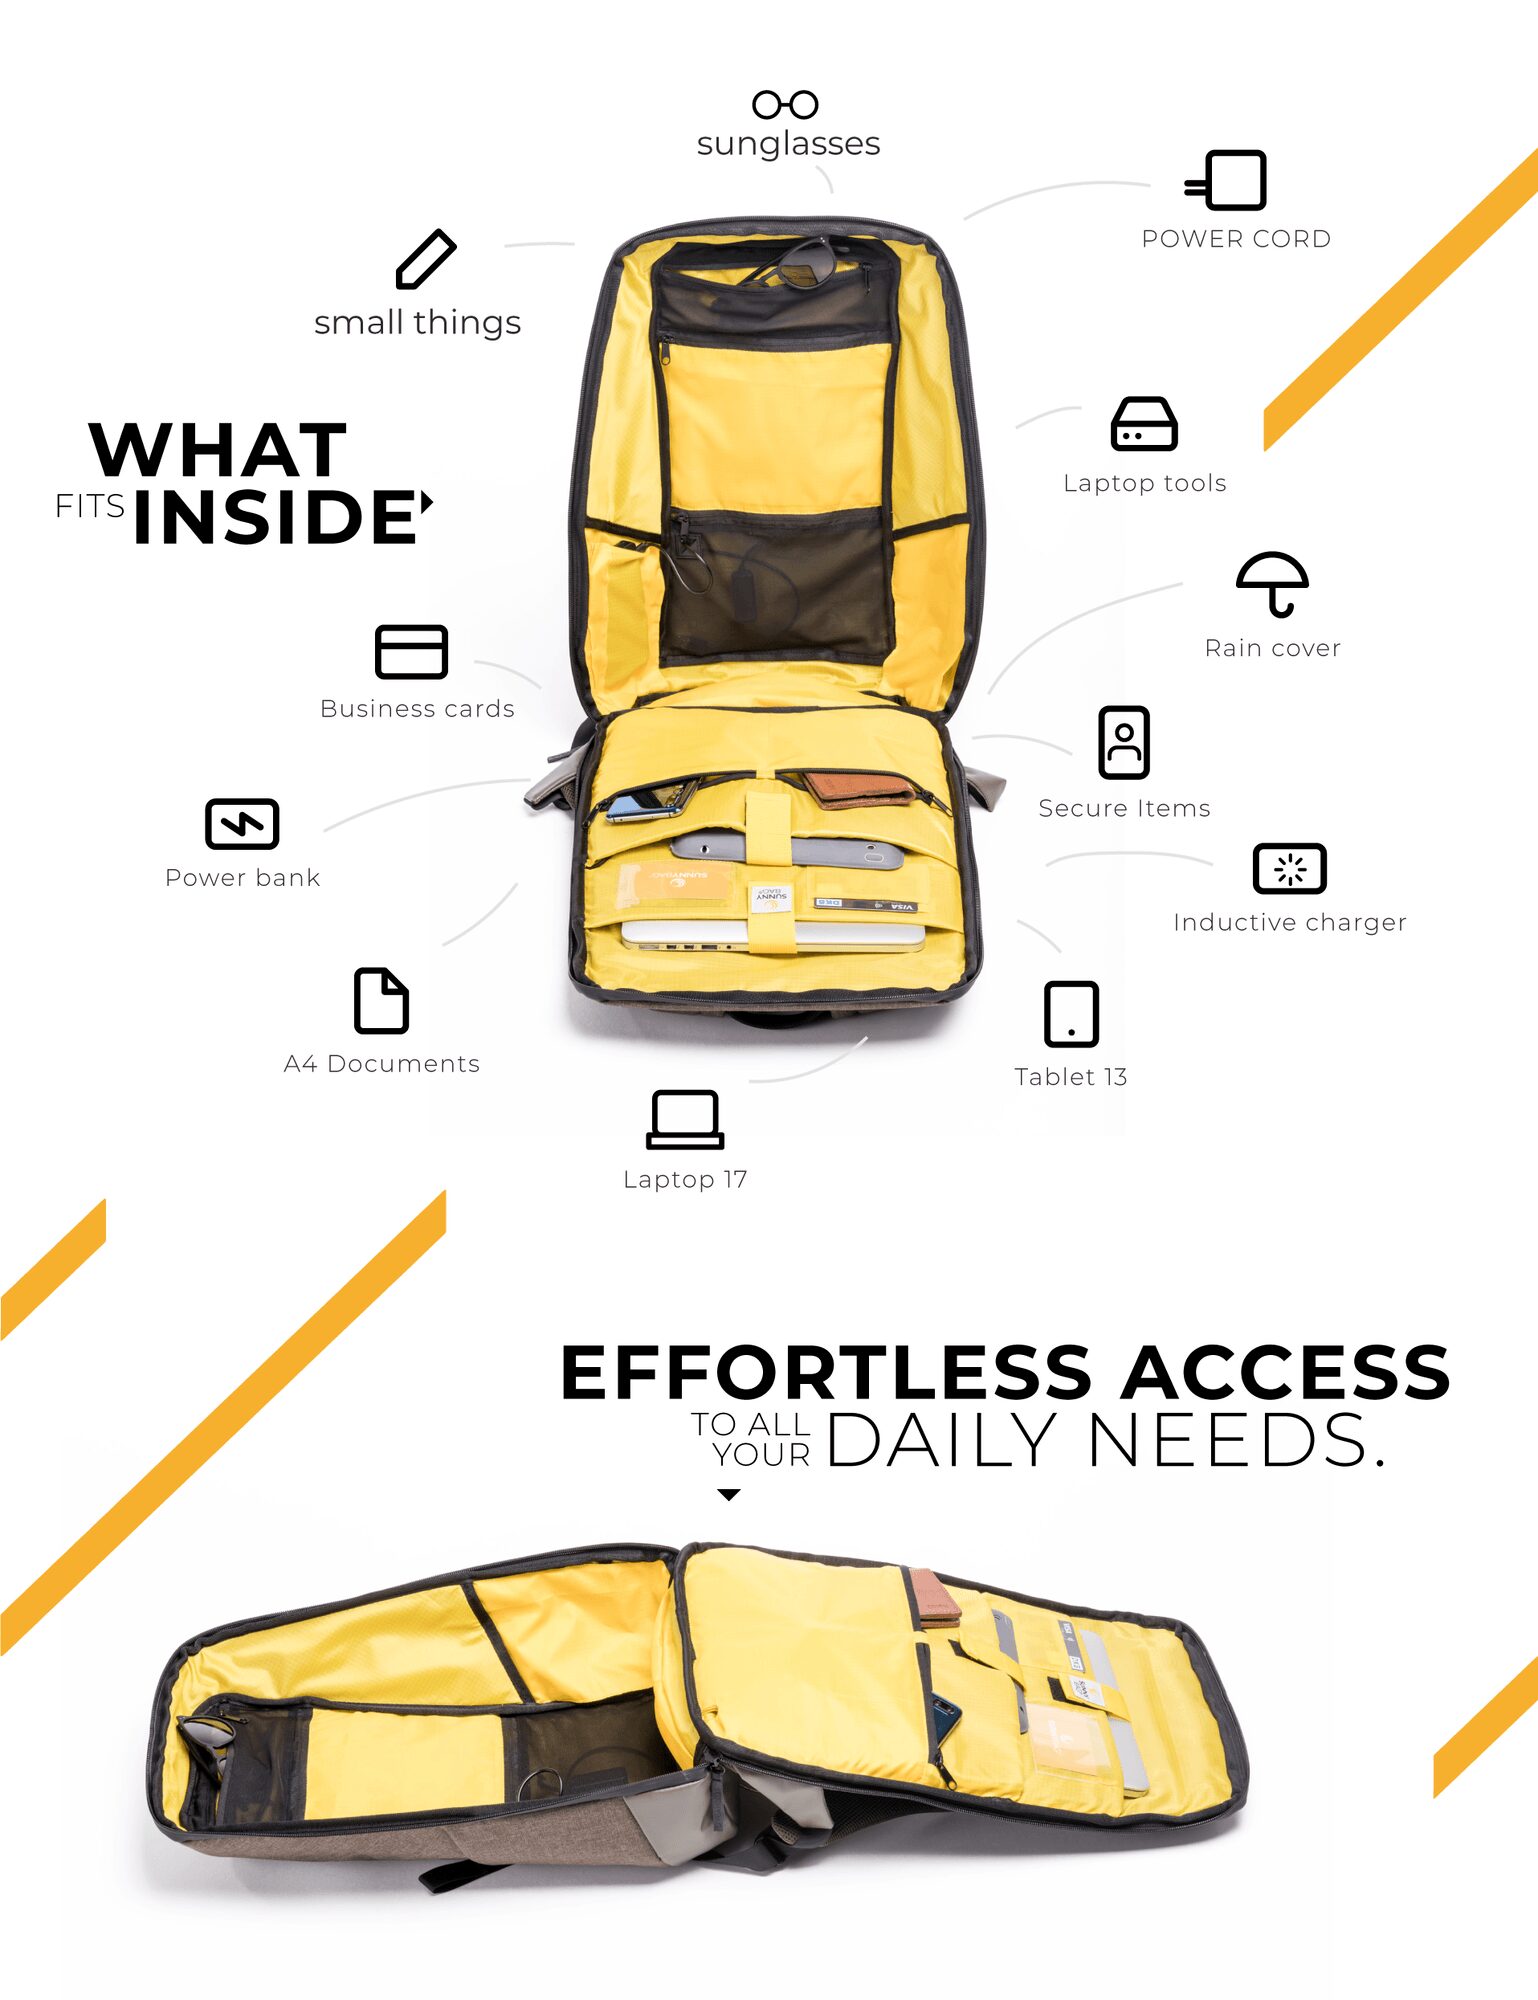 sunnybag sunnybag iconic solar backpack 1 SUNNYBAG Iconic – Le sac à dos solaire utile crowdfunding